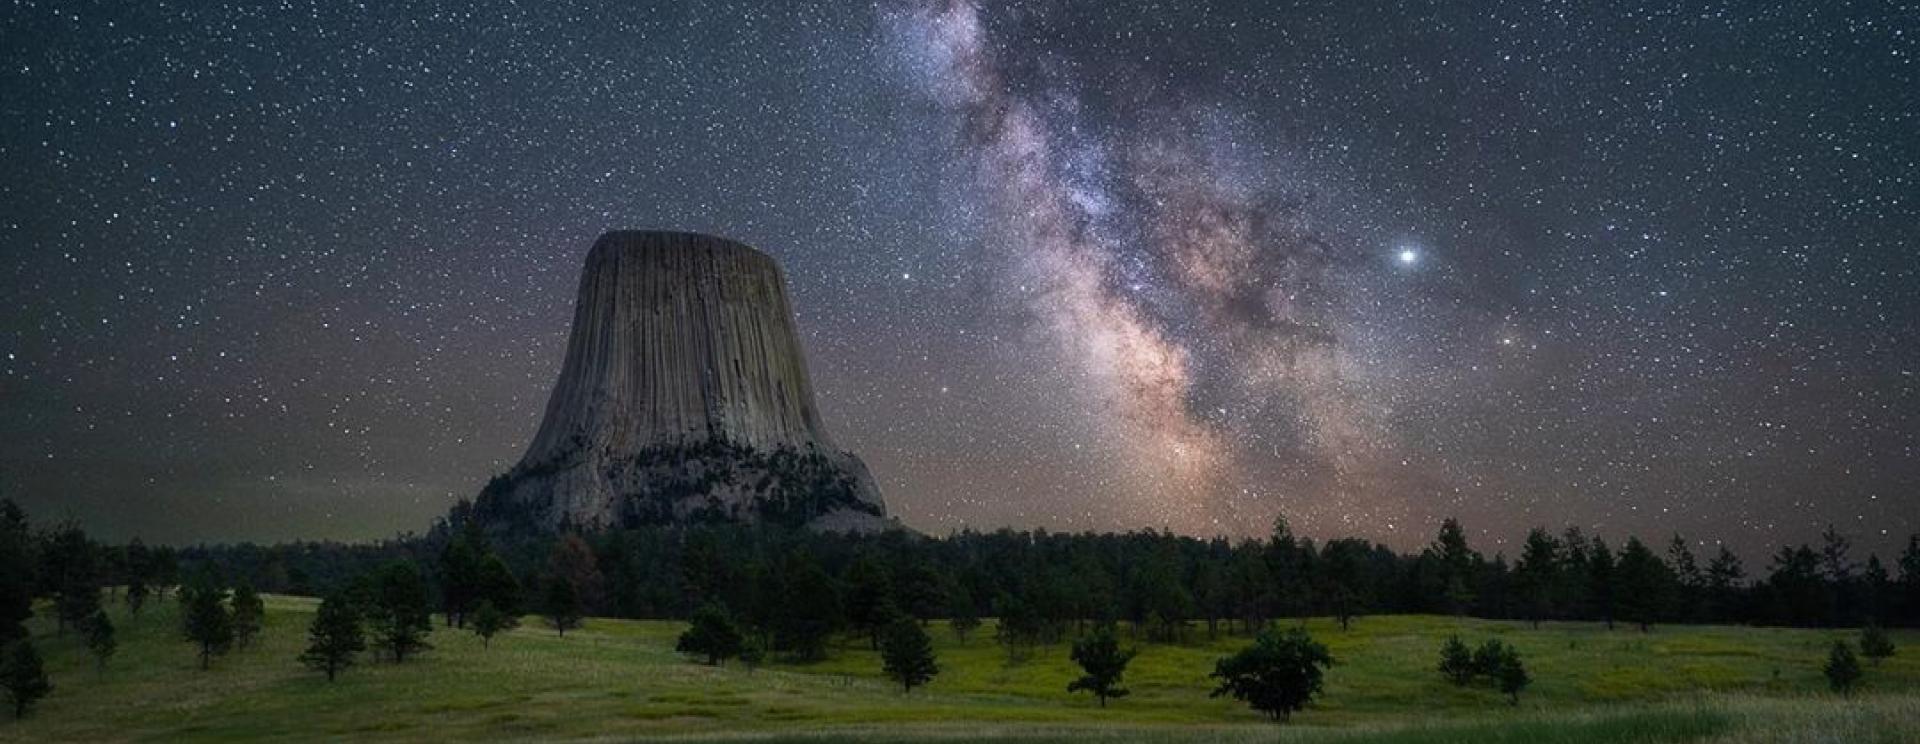 The 5 Most Remarkable Photos of the Black Hills and Badlands in March 2020